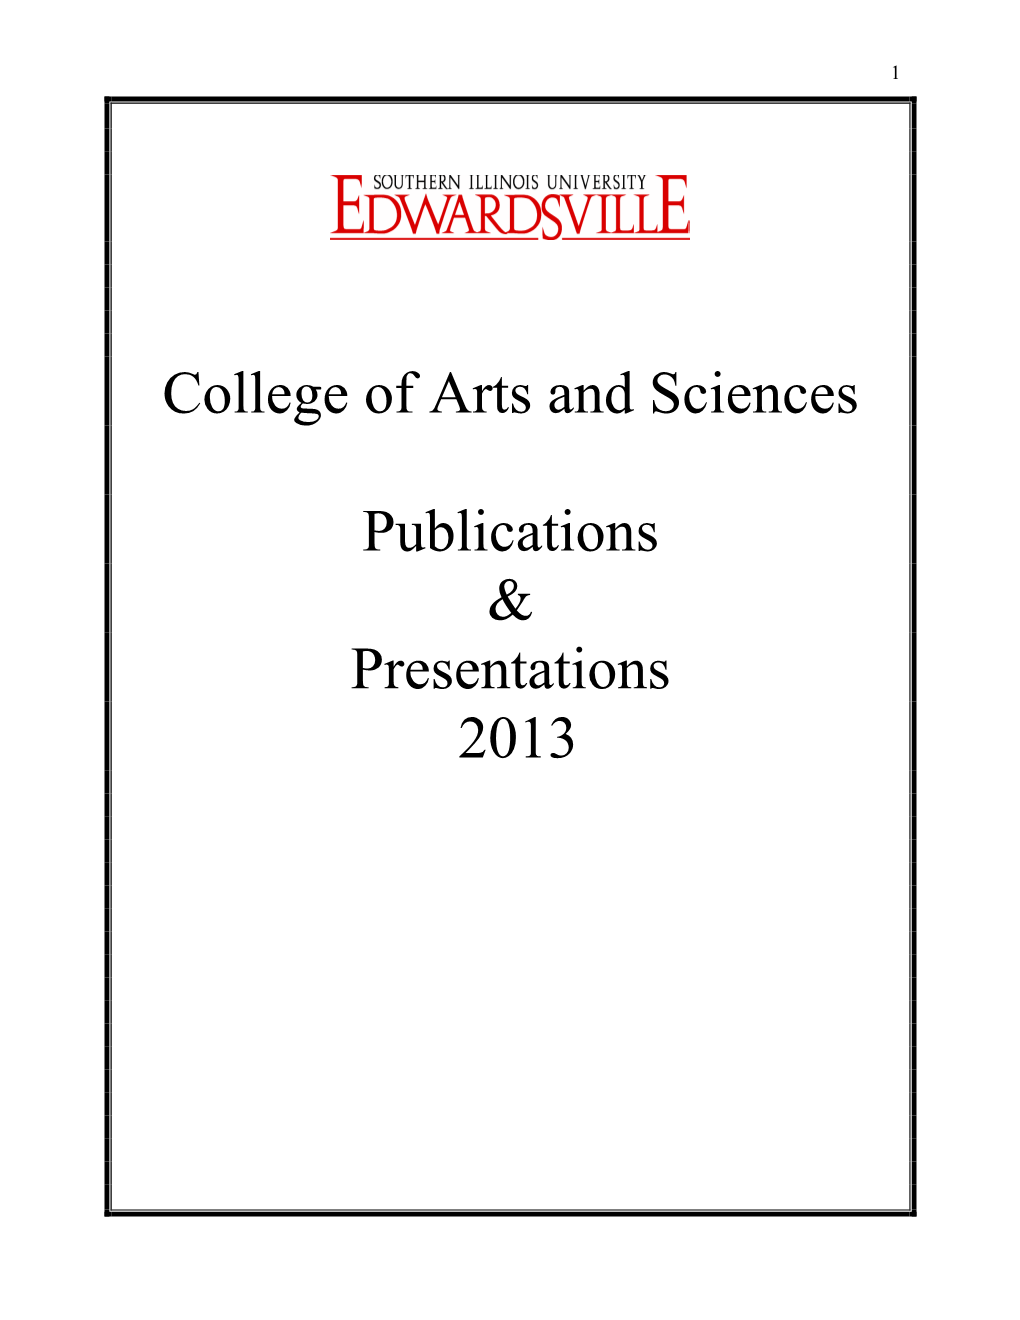 College of Arts and Sciences Publications & Presentations 2013